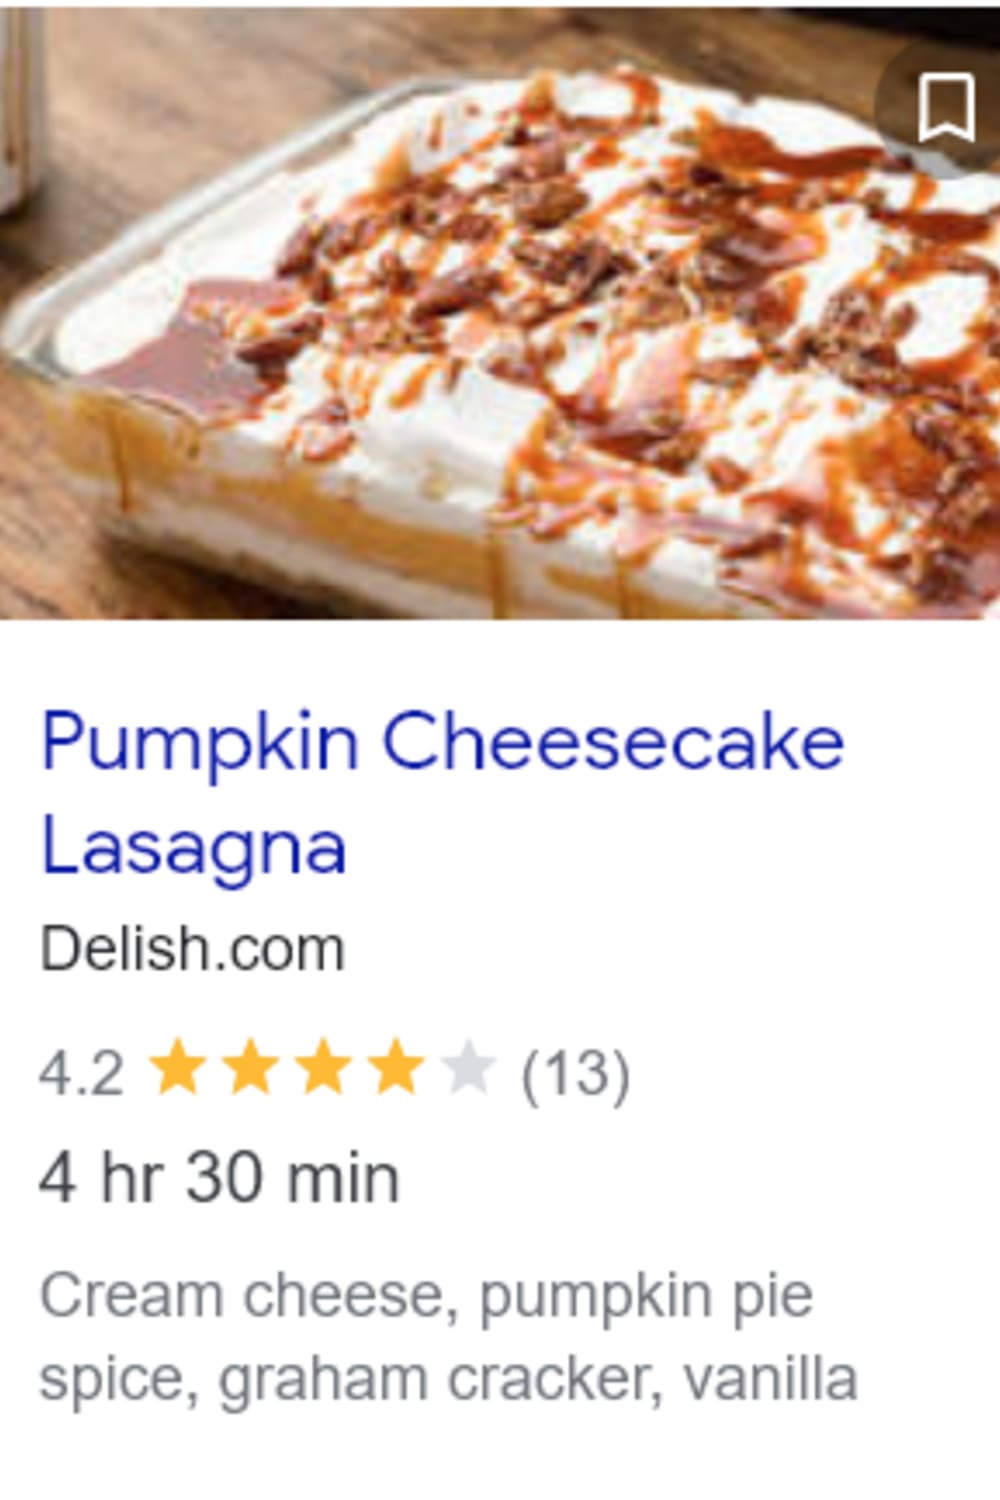 Light Desserts for Thanksgiving and more creative Thanksgiving dessert ideas - this pumpkin cheese cake lasagna is super simple and delicious. It's a real showstopper too